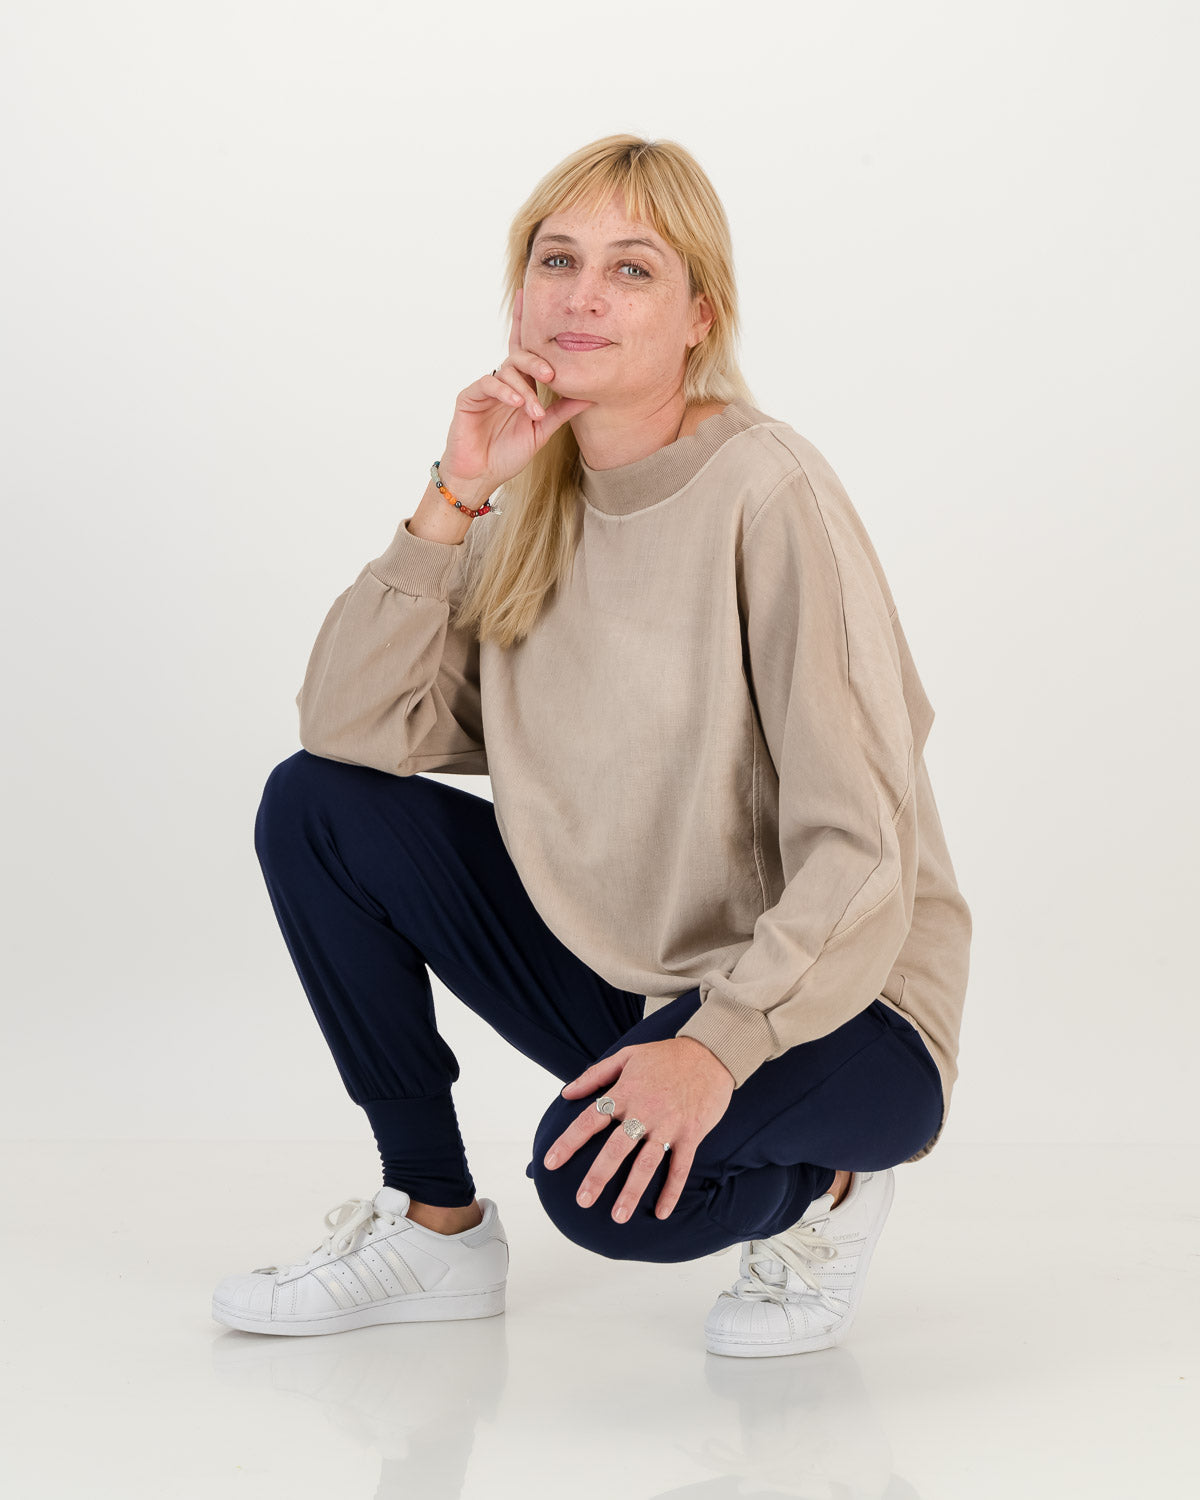 Batwing Overdyed stone Sweatshirt, back hem is dipped and longer than the front